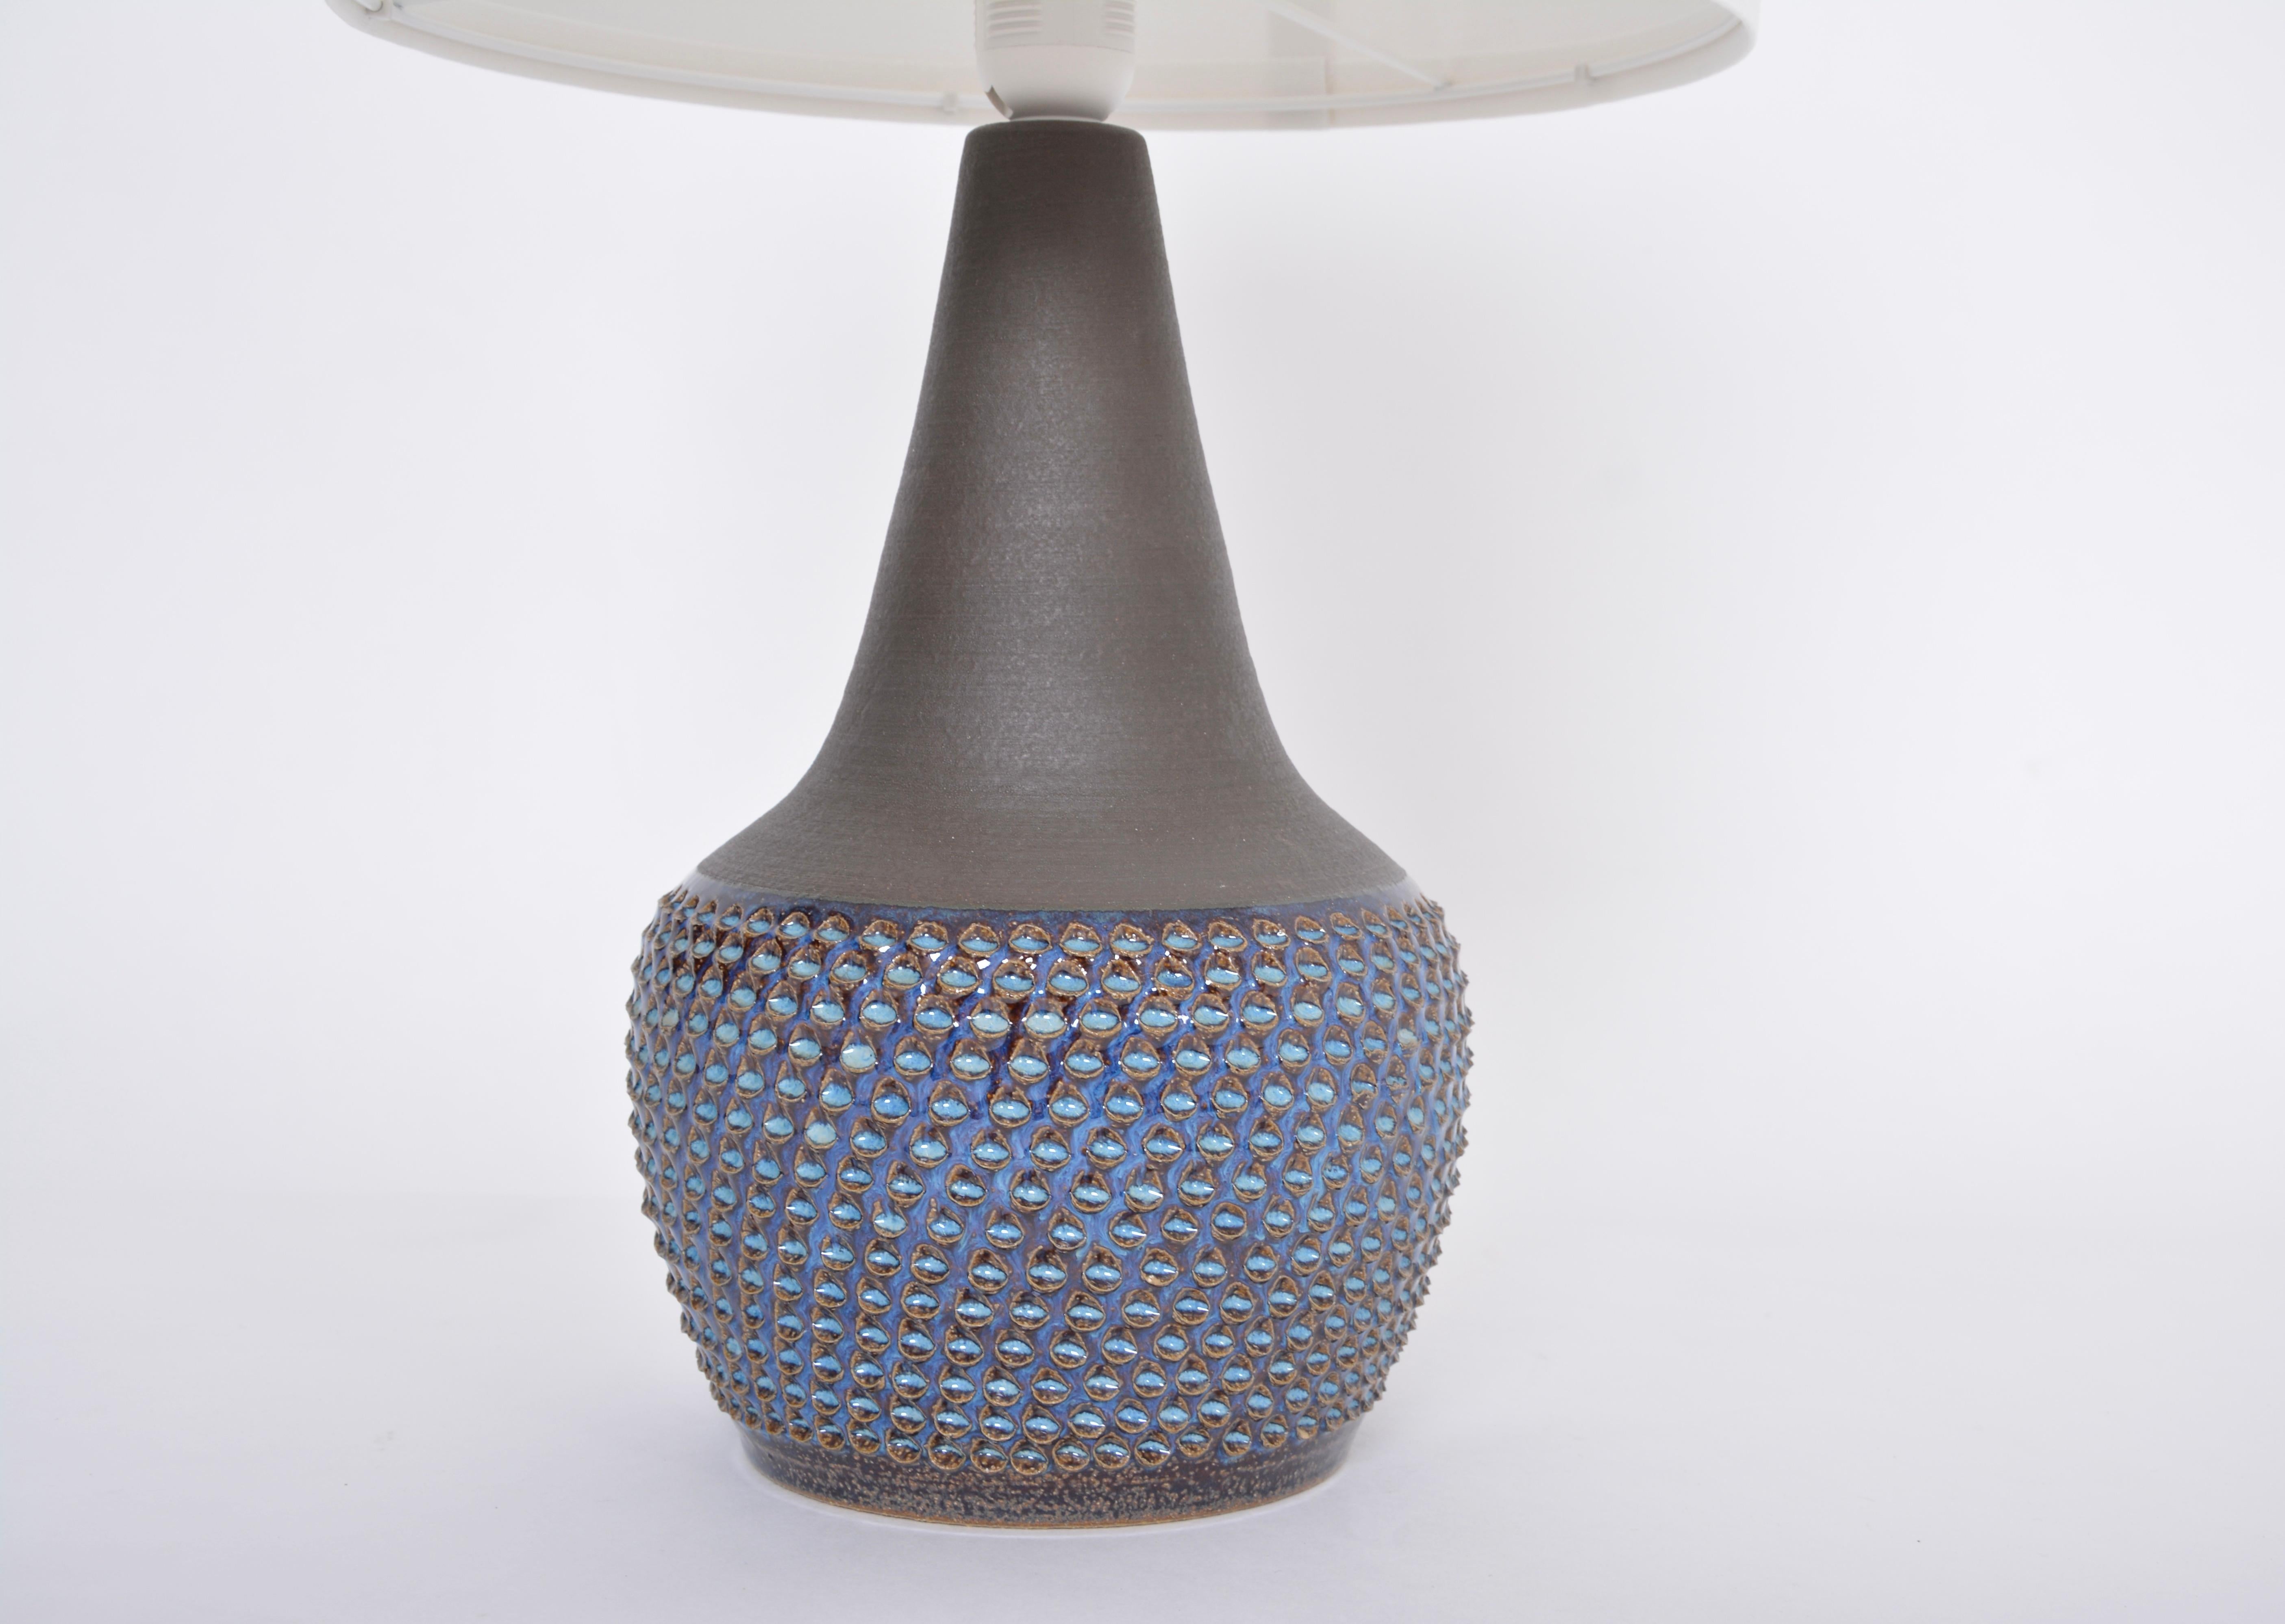 Handmade Danish midcentury ceramic lamp Model 3048 by Einar Johansen for Soholm
Stunning table lamp handmade of stoneware with ceramic glazing in different tones of blue. Circular pattern to the base of the lamp. Produced by Danish company Soholm.